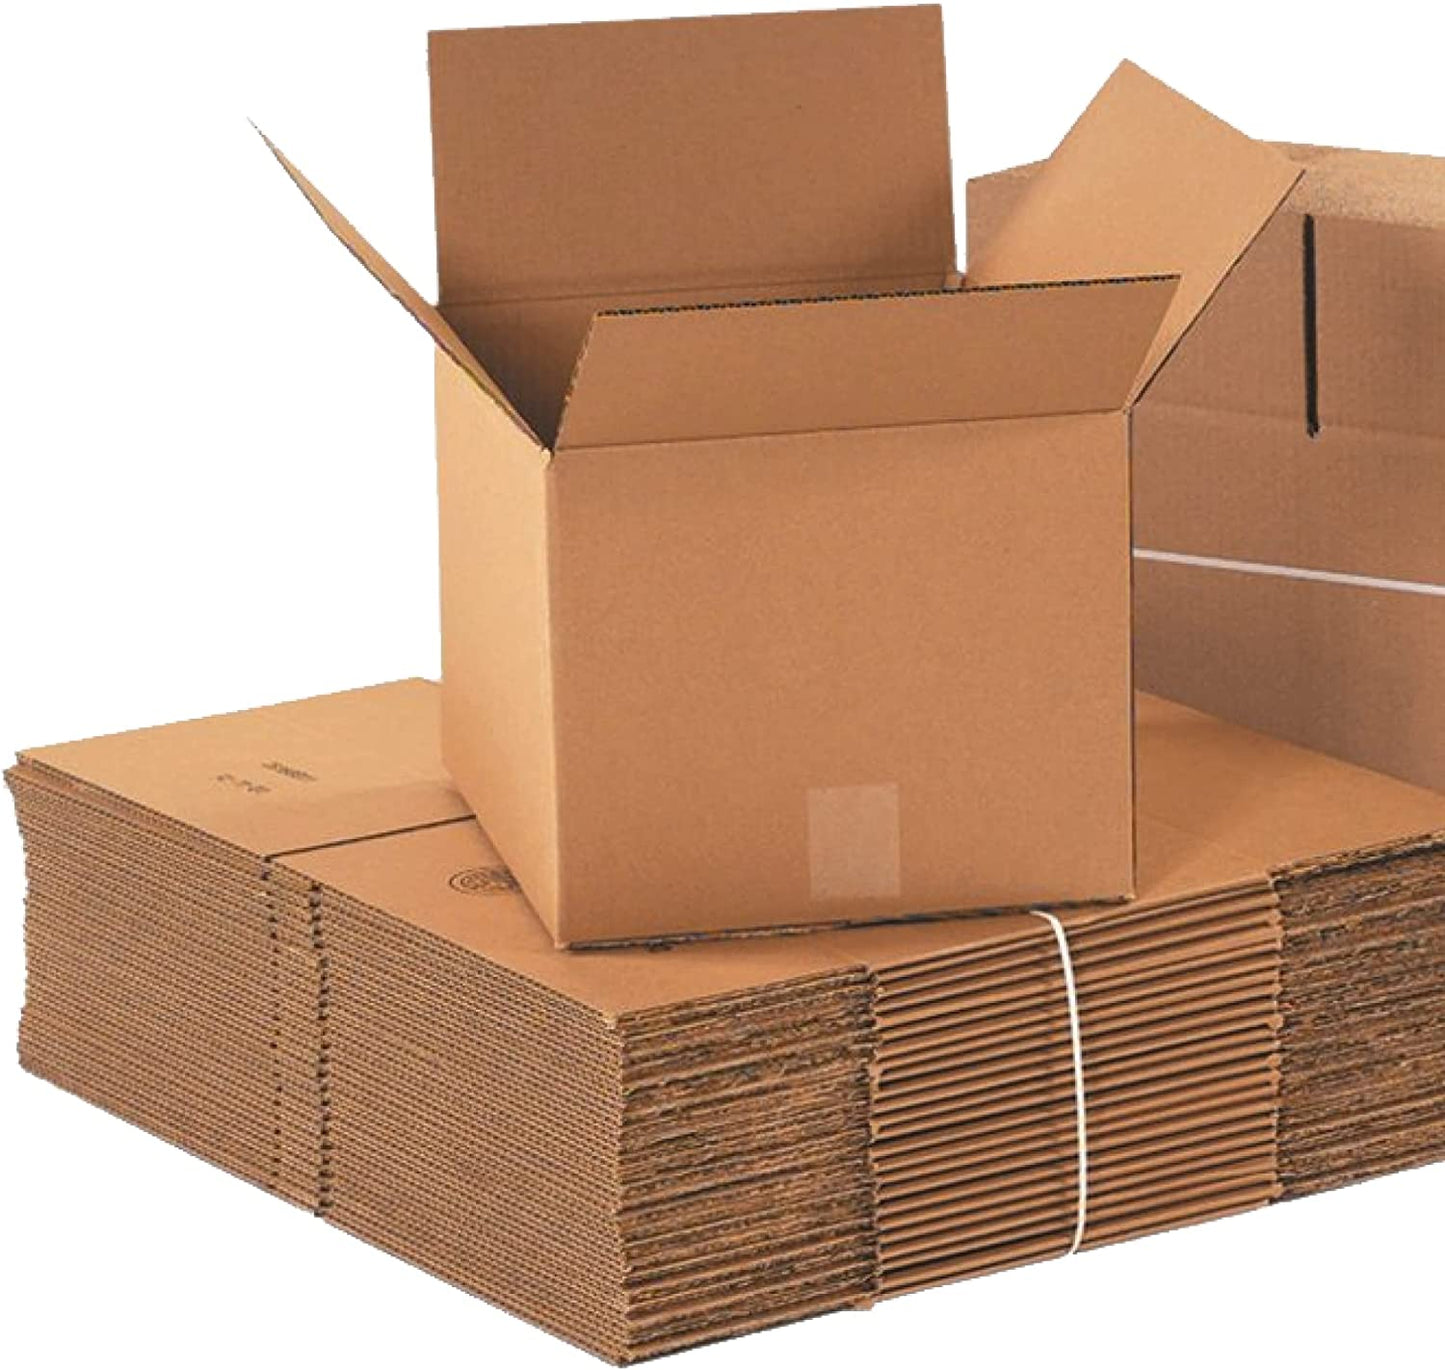 AVIDITI Shipping Boxes Small 12"L x 12"W x 12"H, 25-Pack | Corrugated Cardboard Box for Packing, Moving and Storage